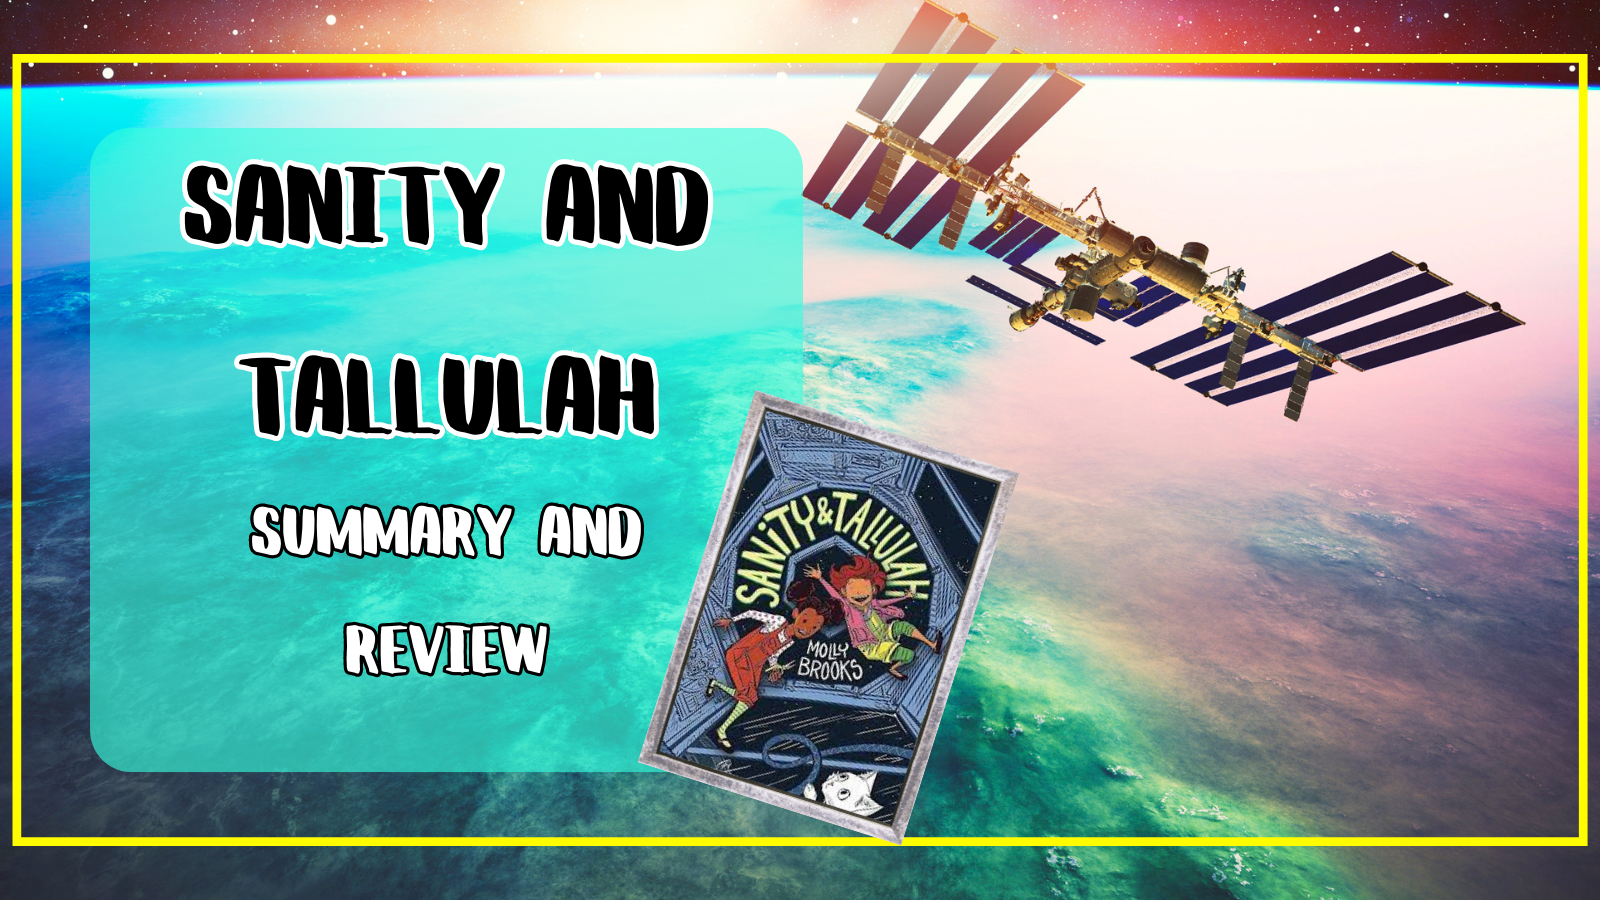 Sanity and Tallulah Summary and Review